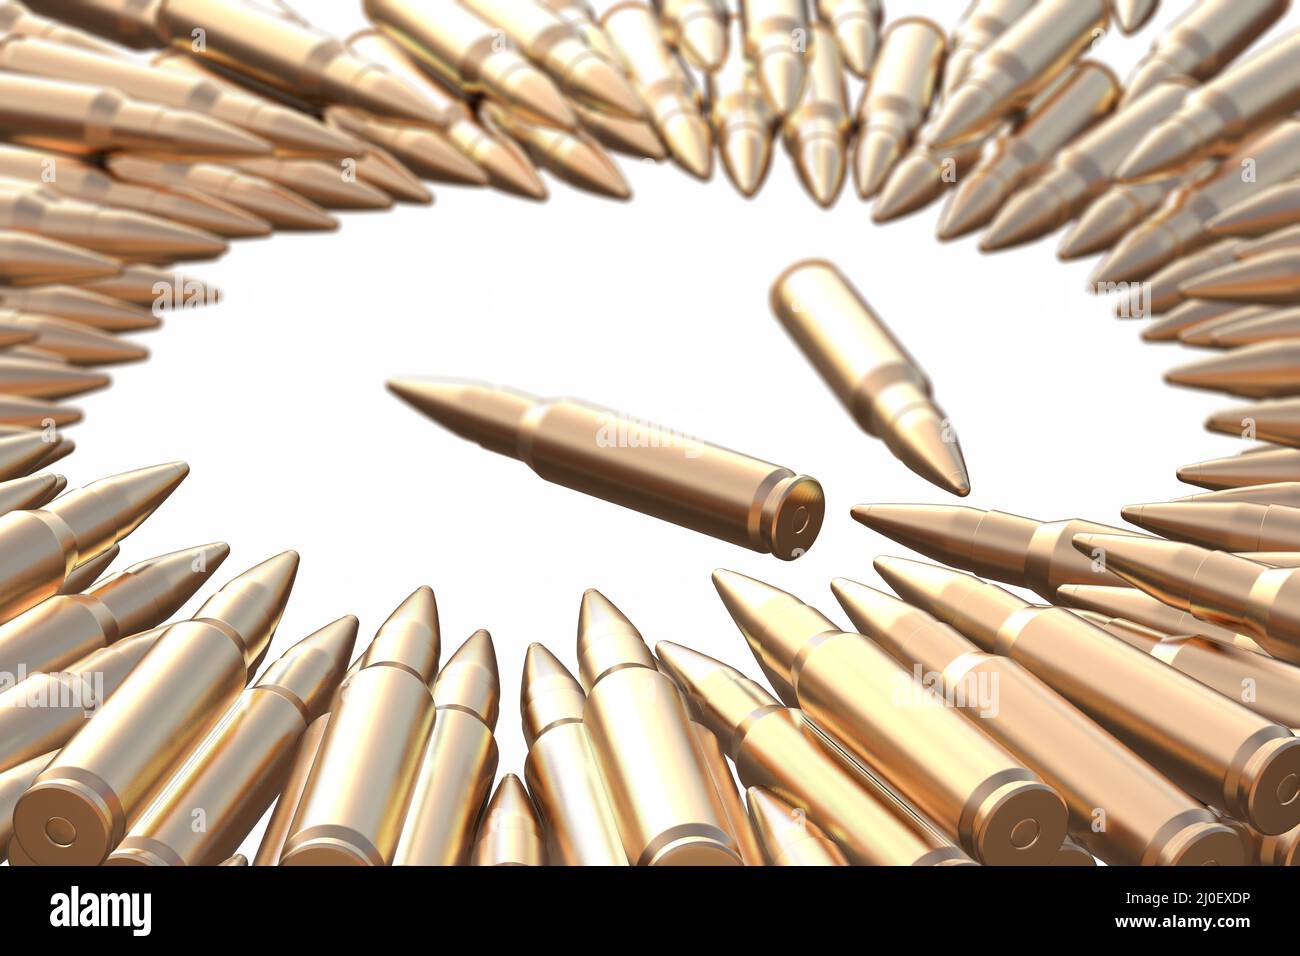 Golden bullets AK-47 cartridges laying on the white background in shape of circle. Danger hunt firearm concept 3d illustration Stock Photo